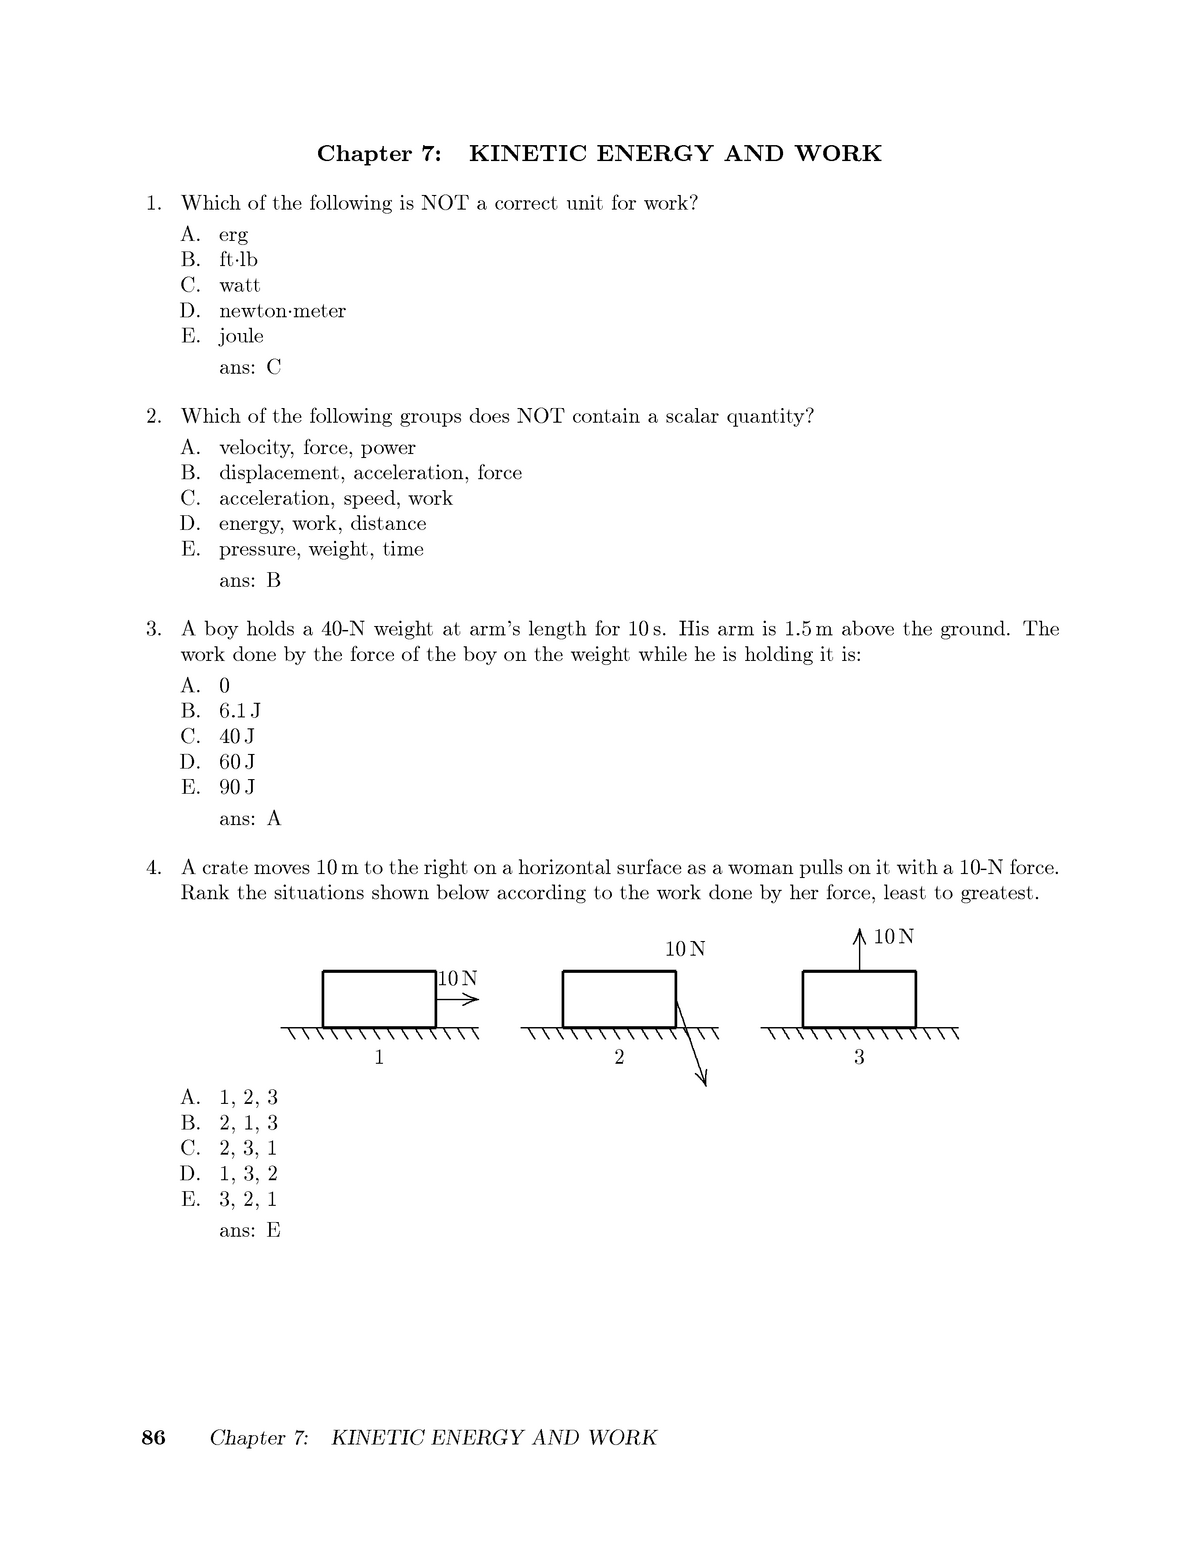 chapter-7-test-bank-multiple-choice-practice-test-for-final-exam